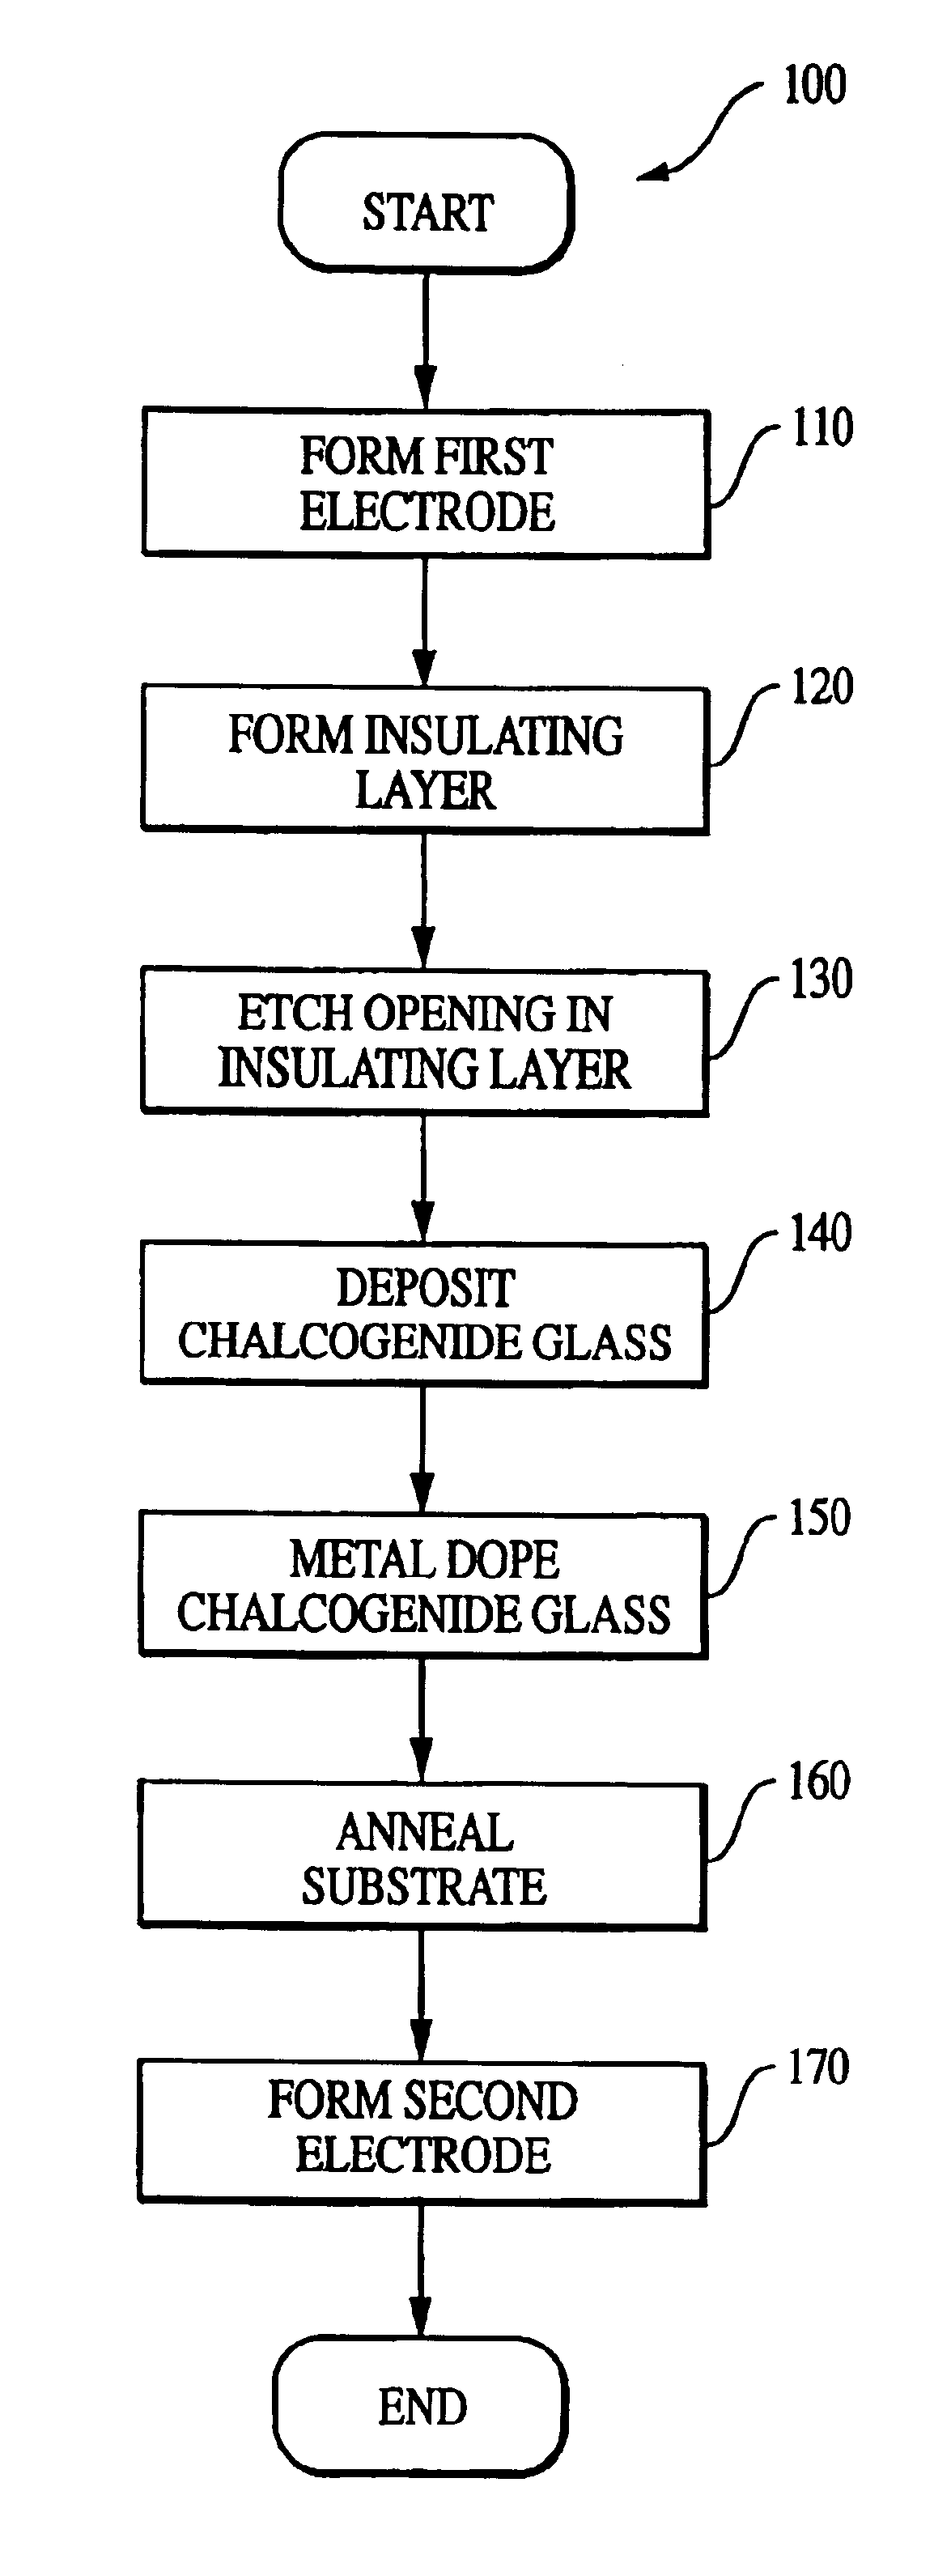 Method to alter chalcogenide glass for improved switching characteristics